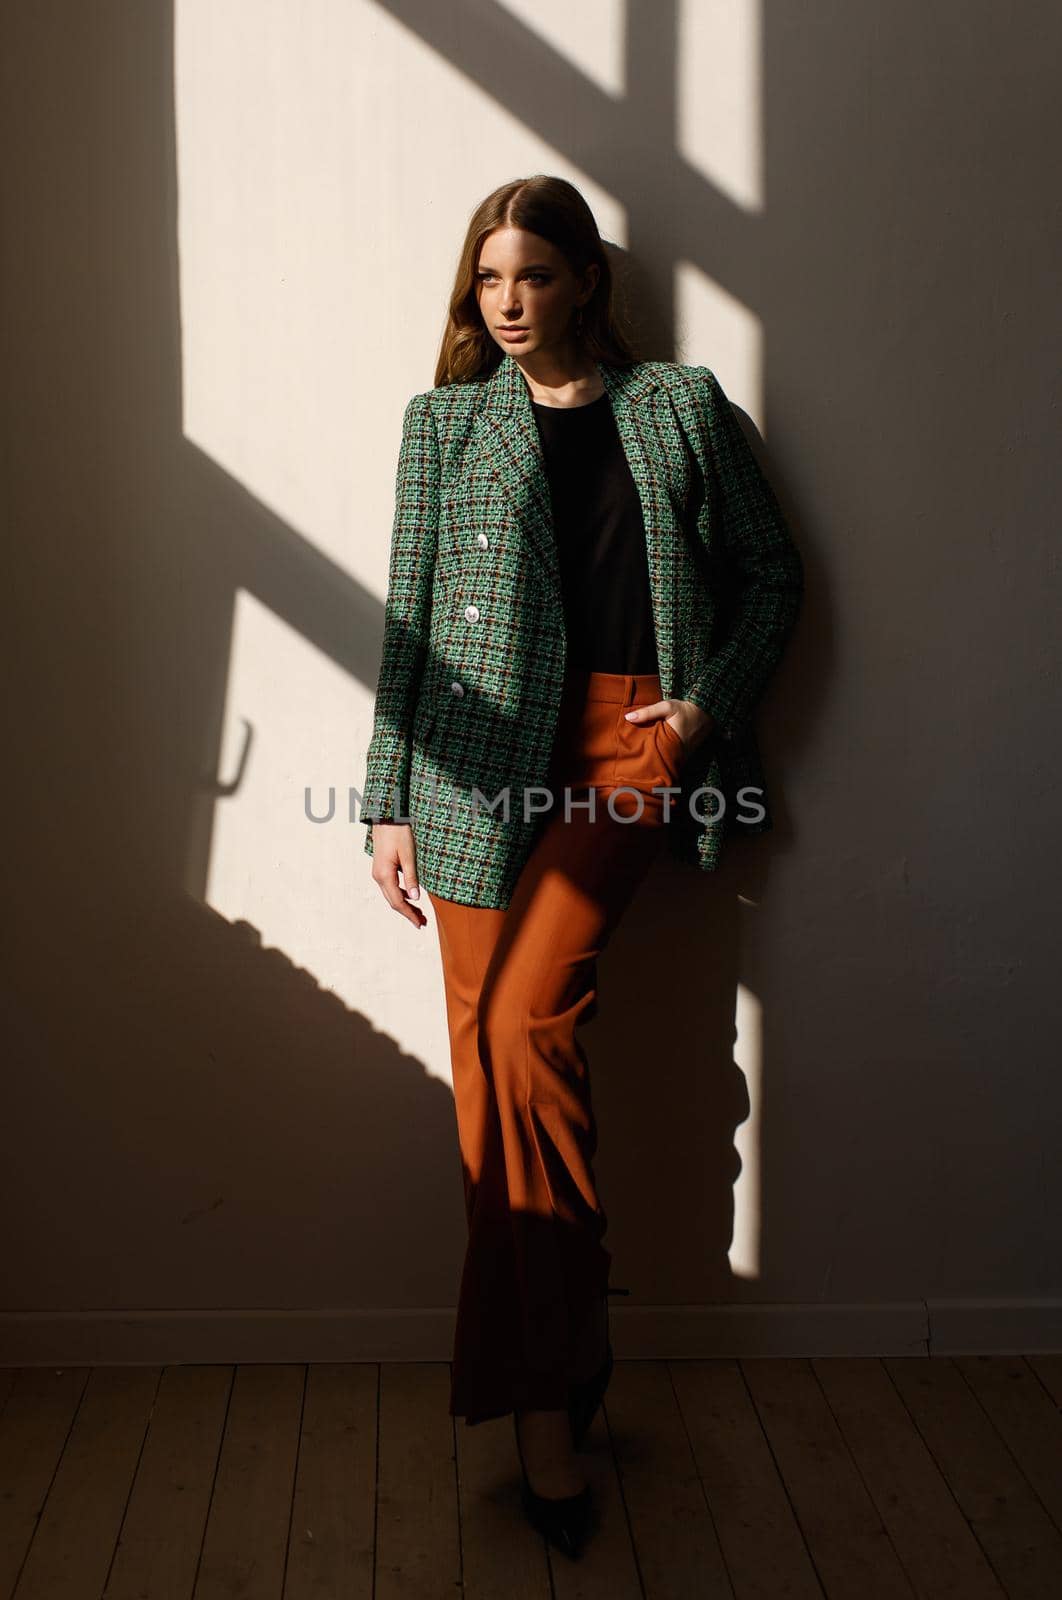 A model girl standing in the rays of the sun. the girl in the reflection of light from the window.